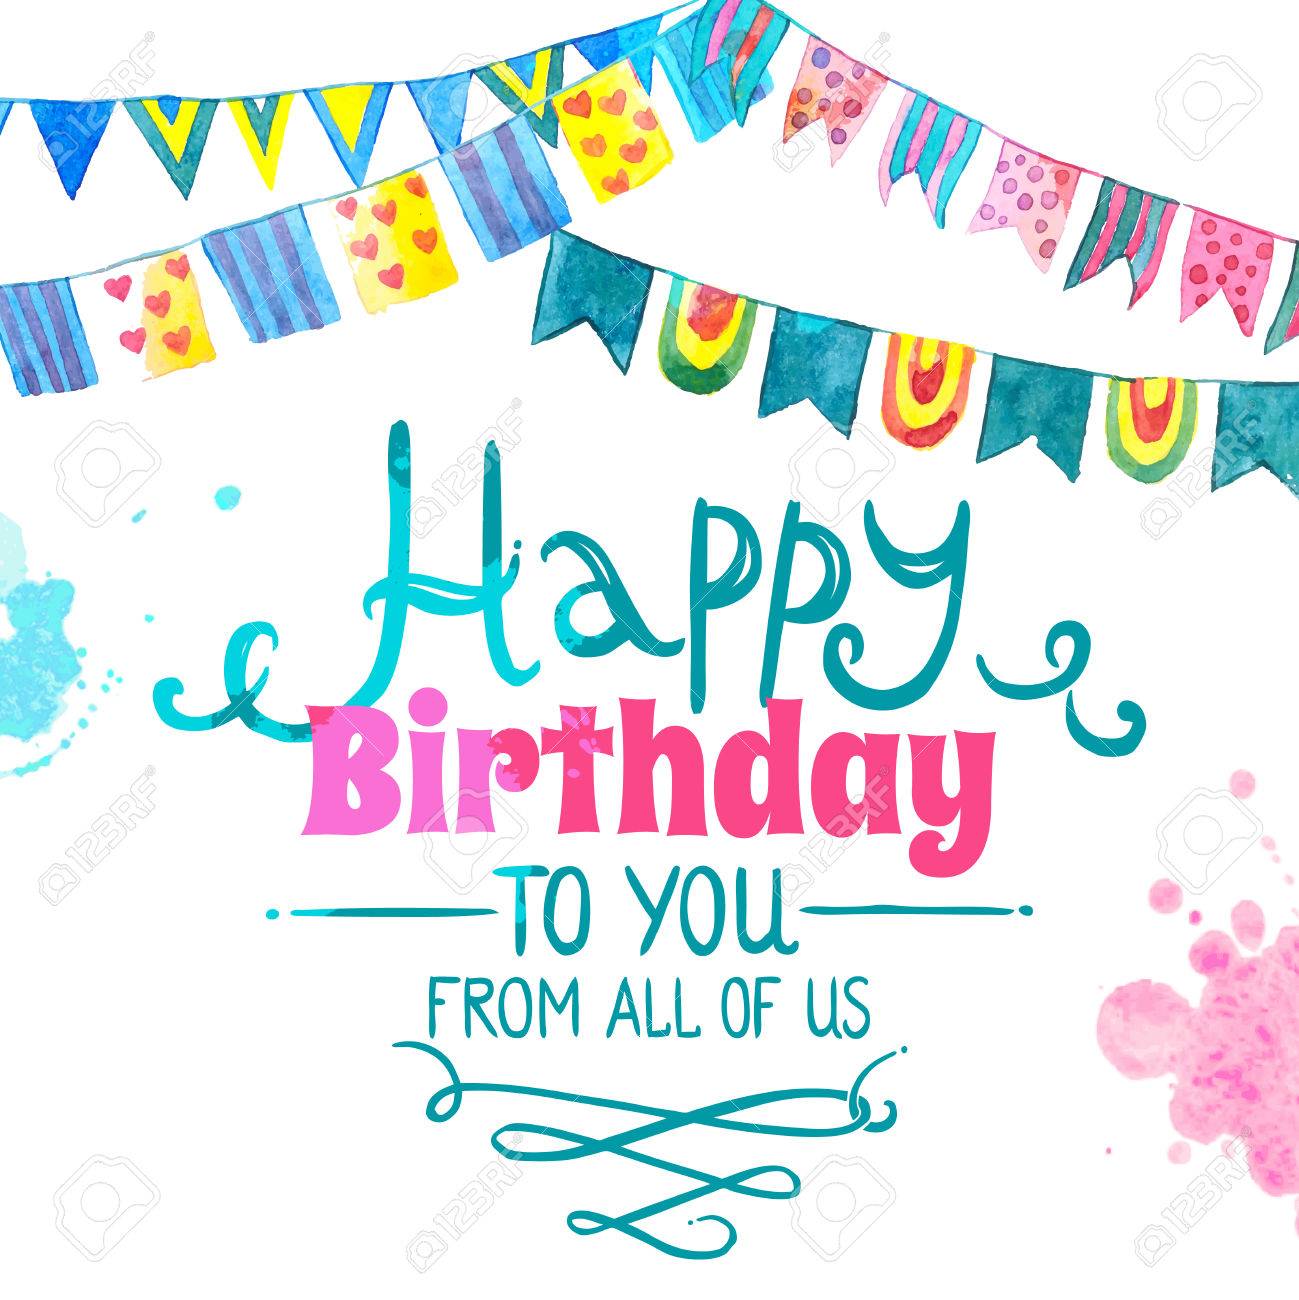 Happy Birthday From All Of Us Clipart.